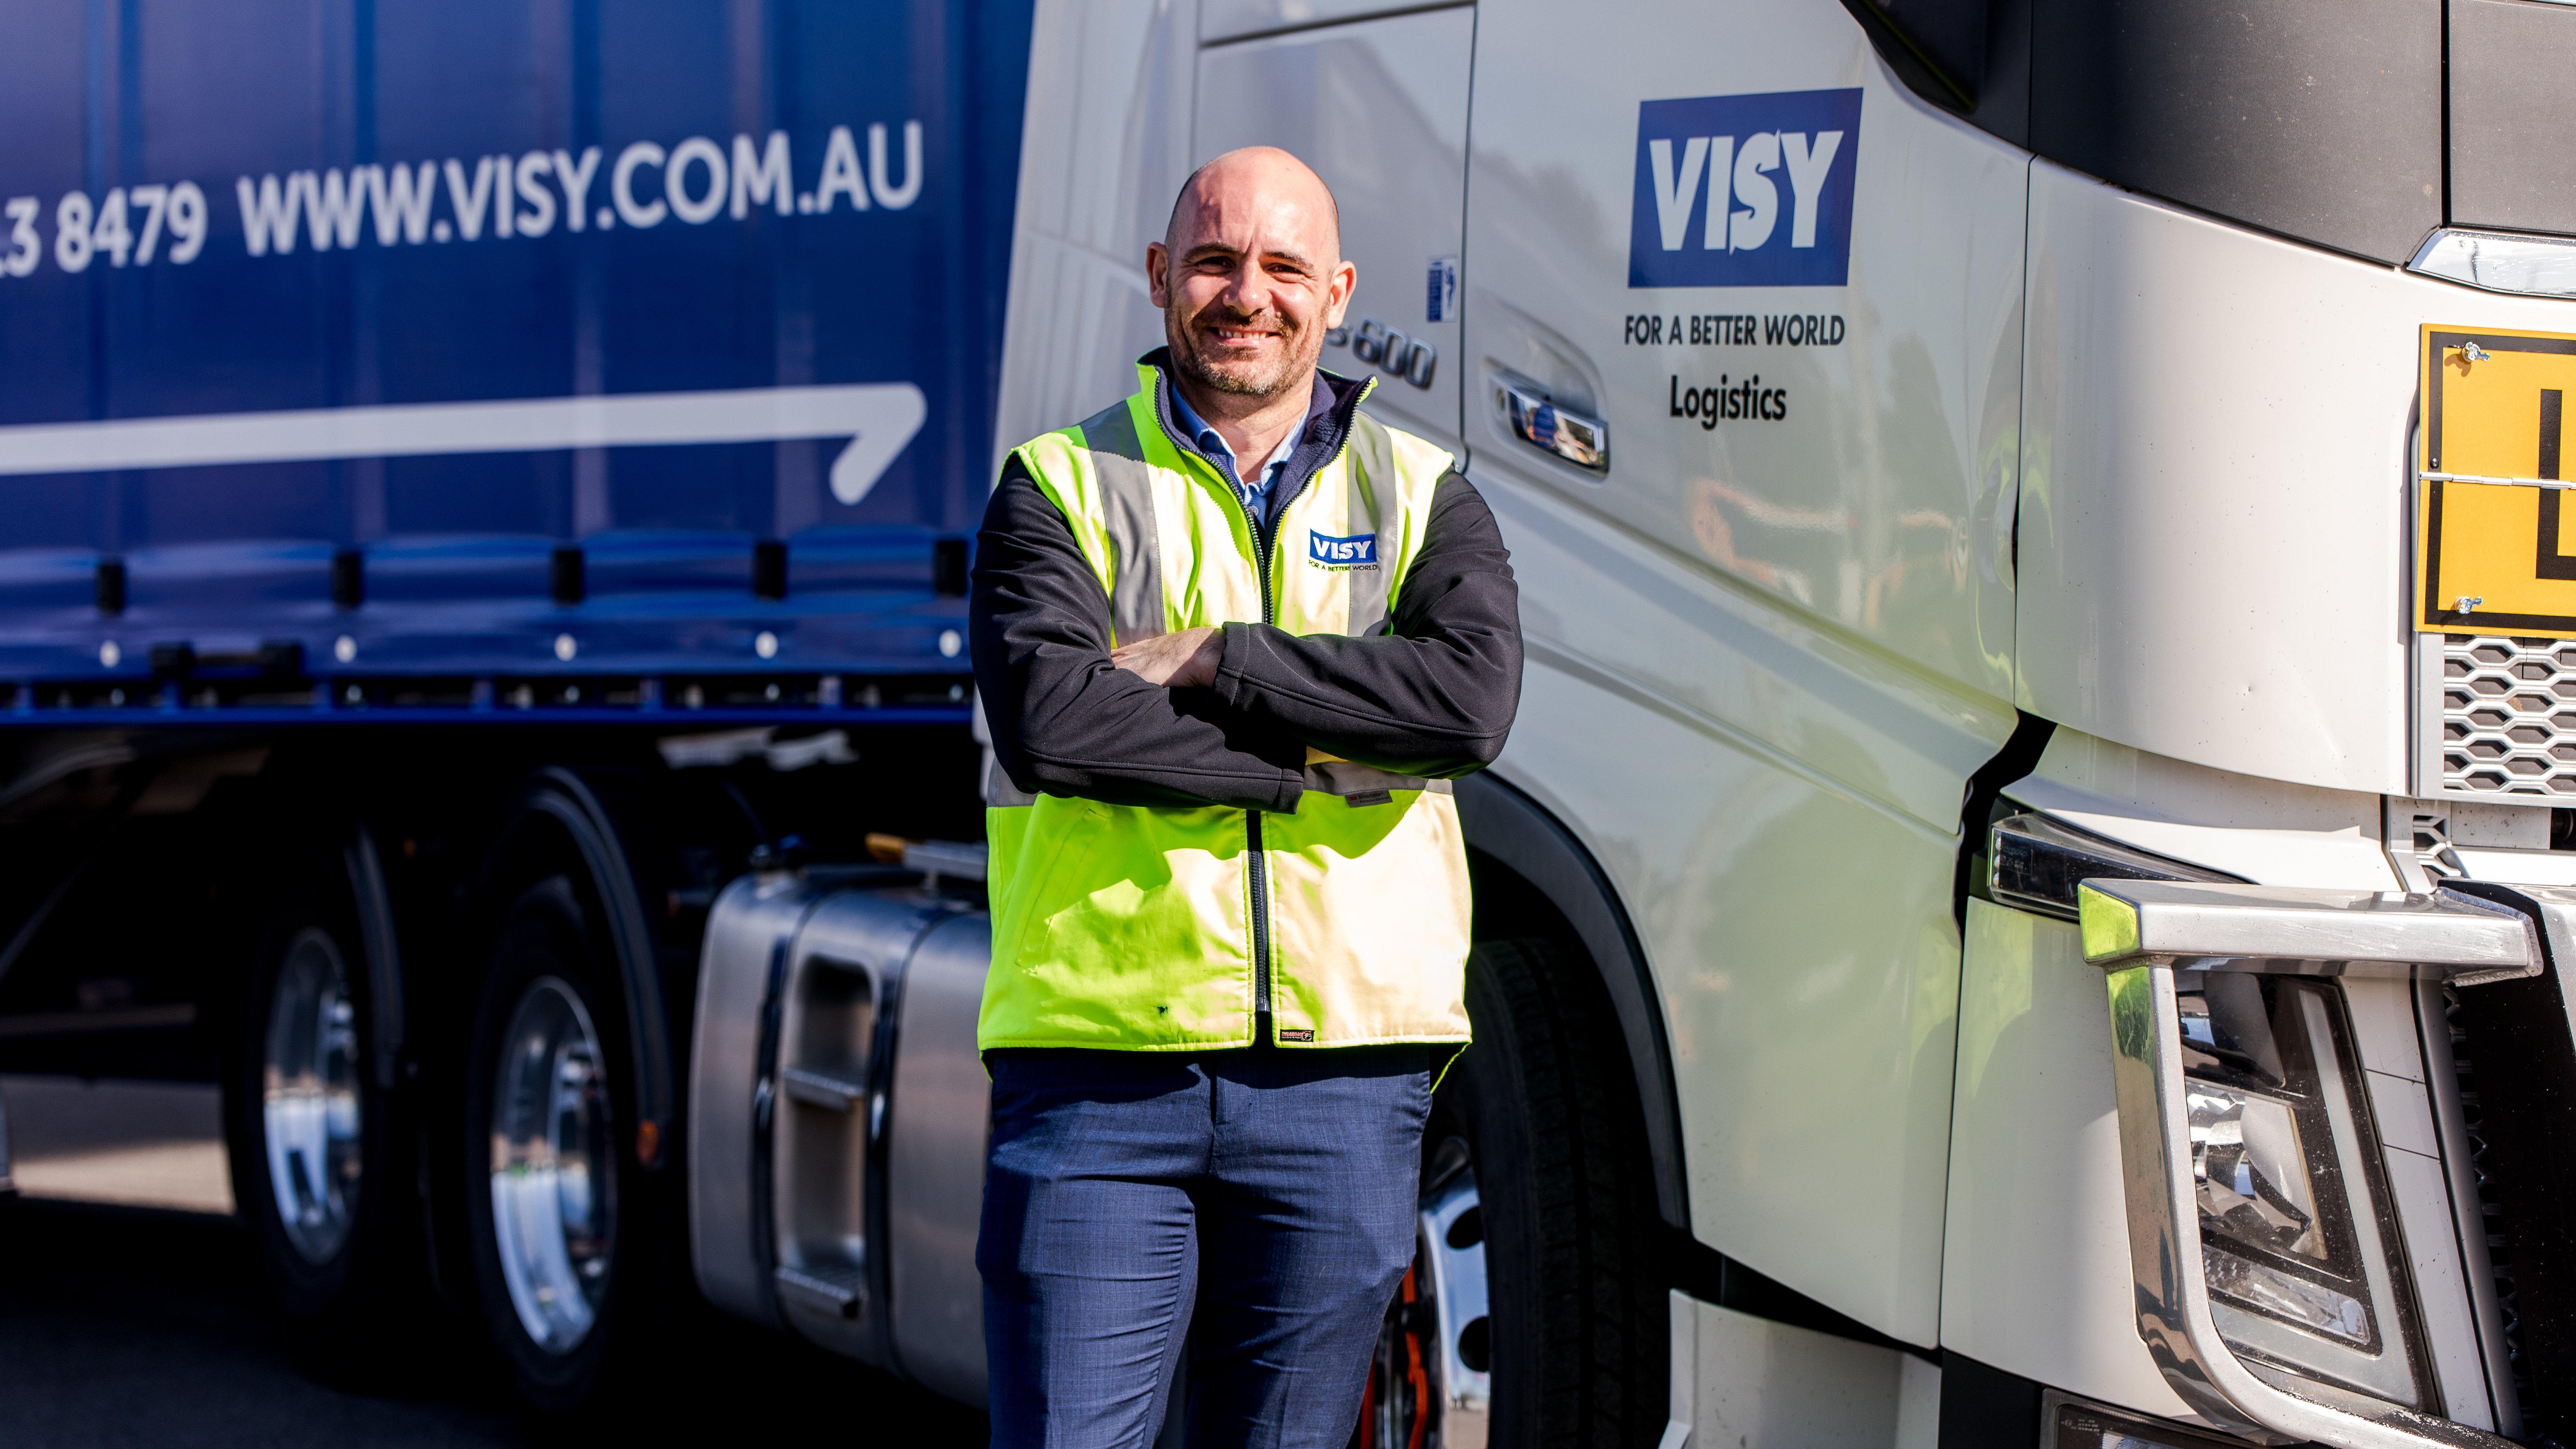 A man in a high visibility safety vest smiles at a camera in front of a Visy truck